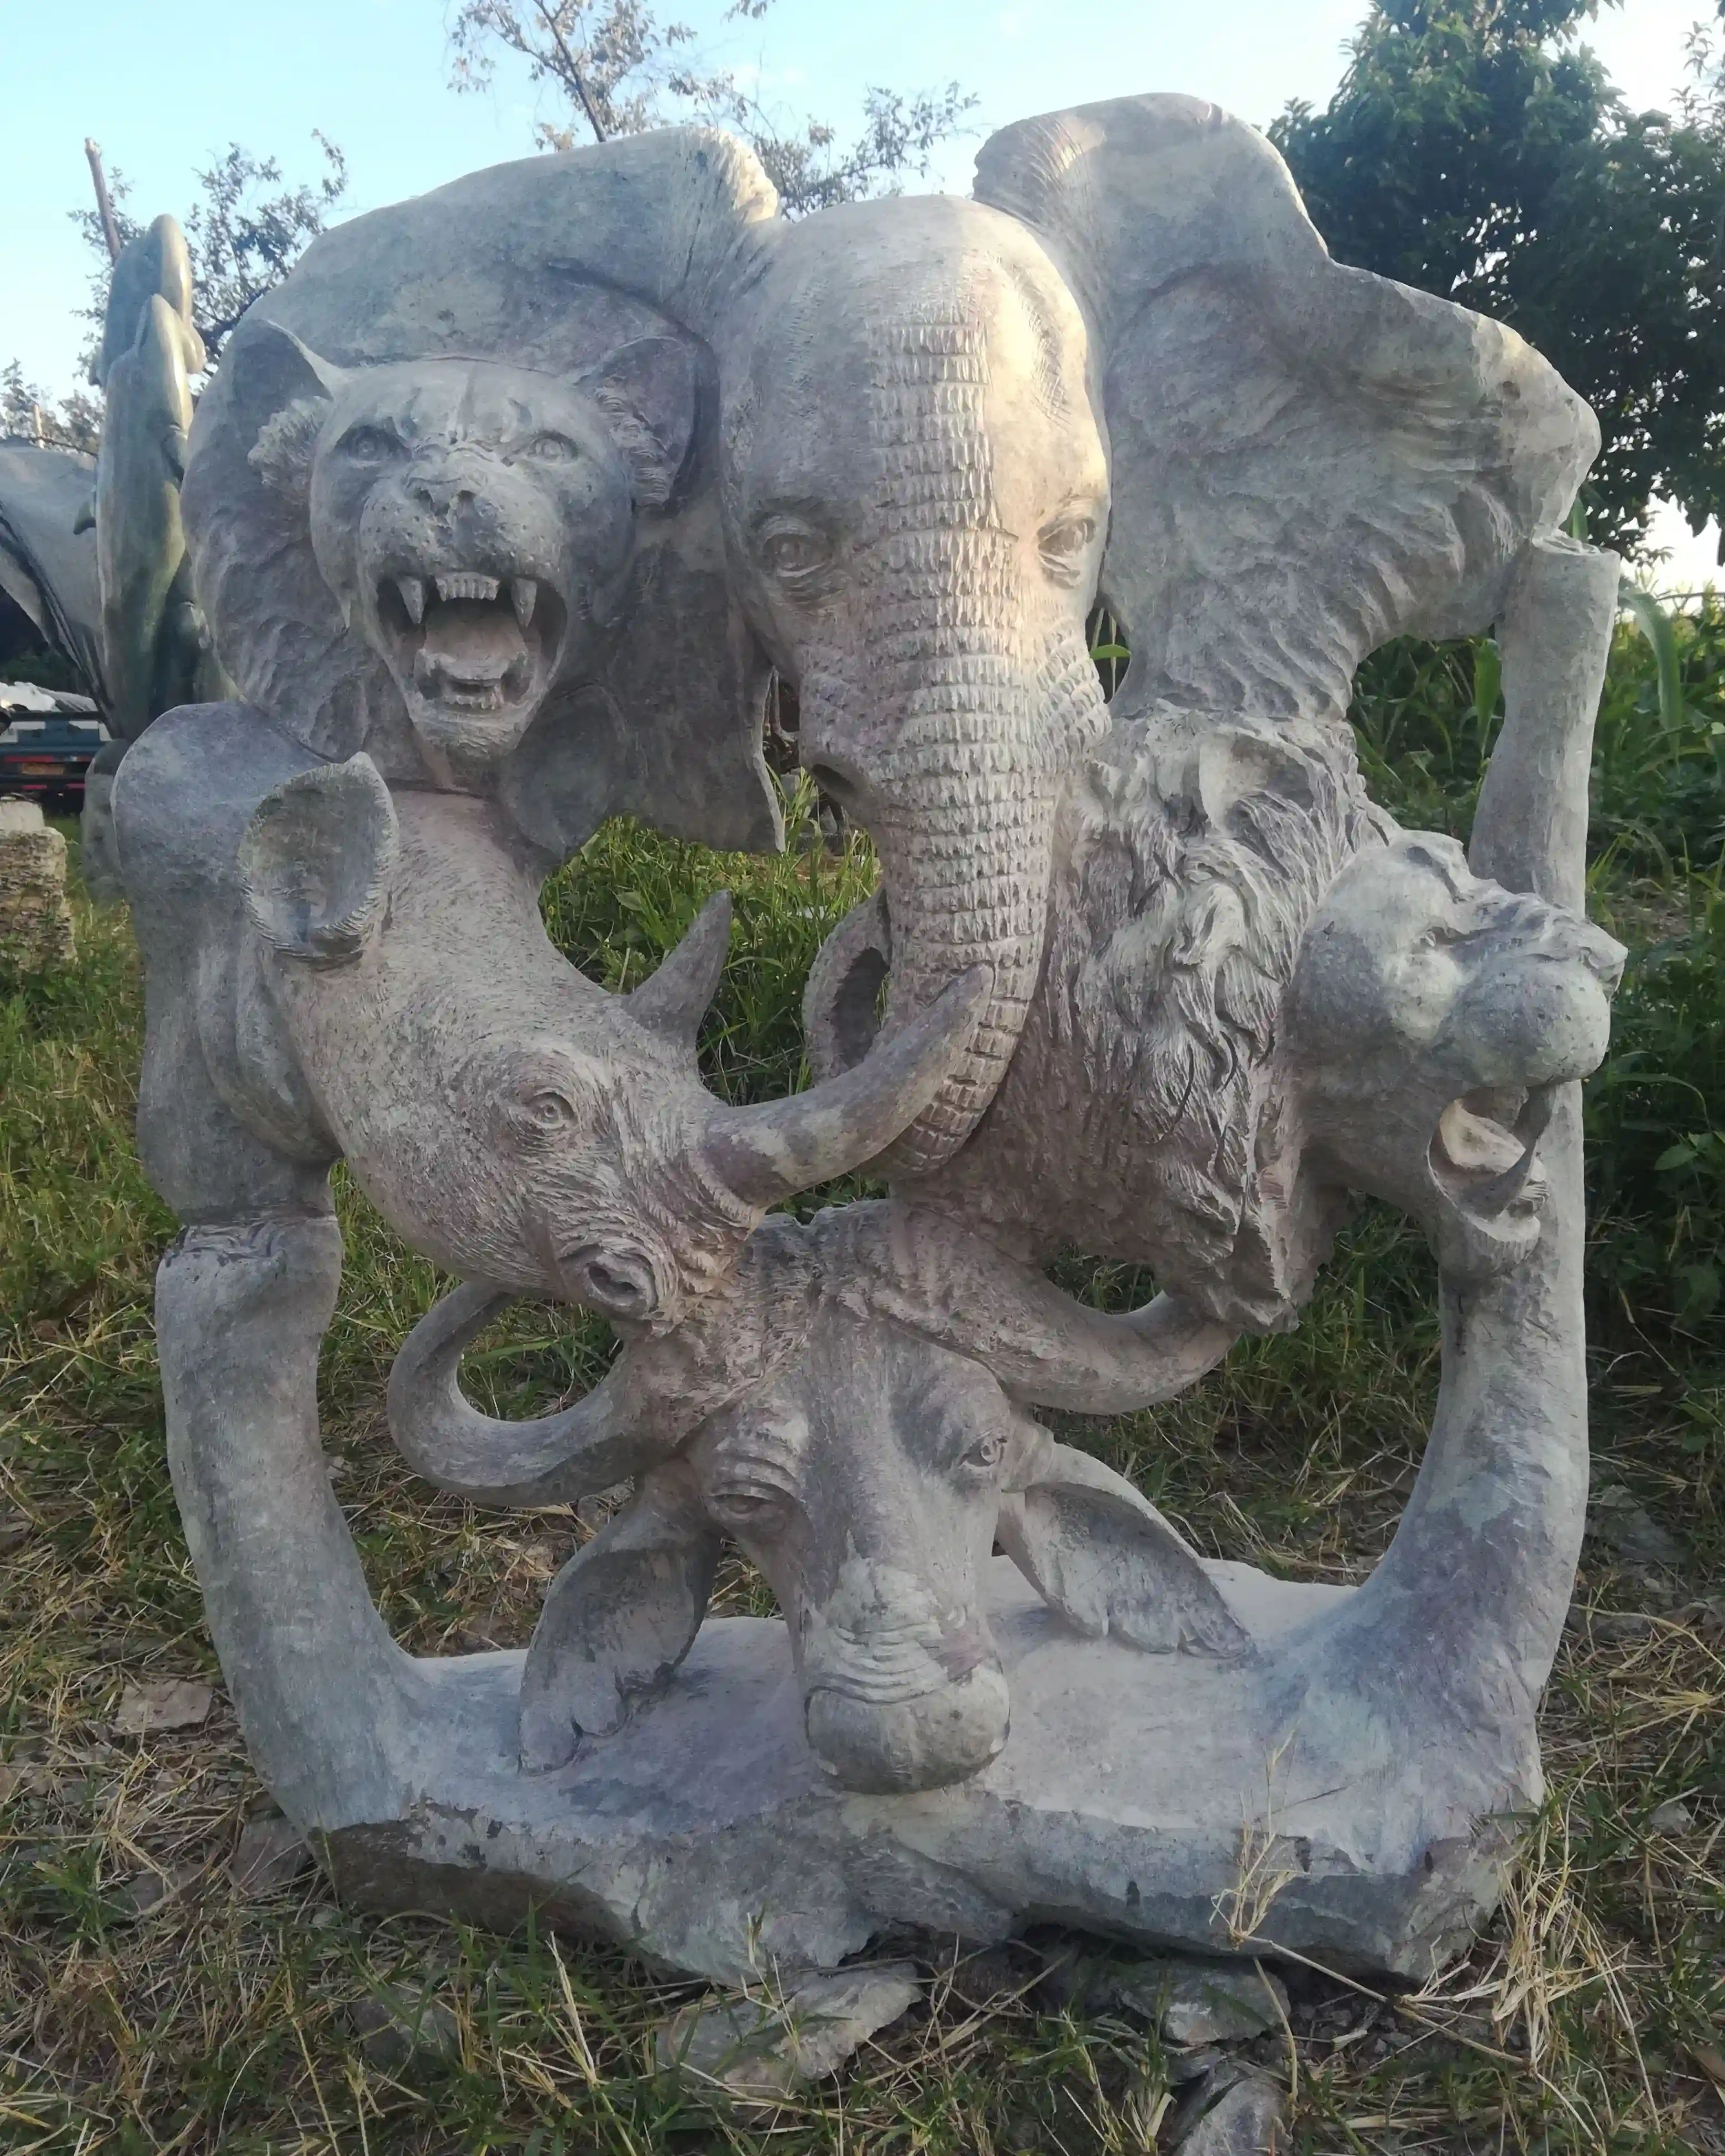 STONE CARVING OF THE BIG FIVE FOR SALE ZIMBABWE